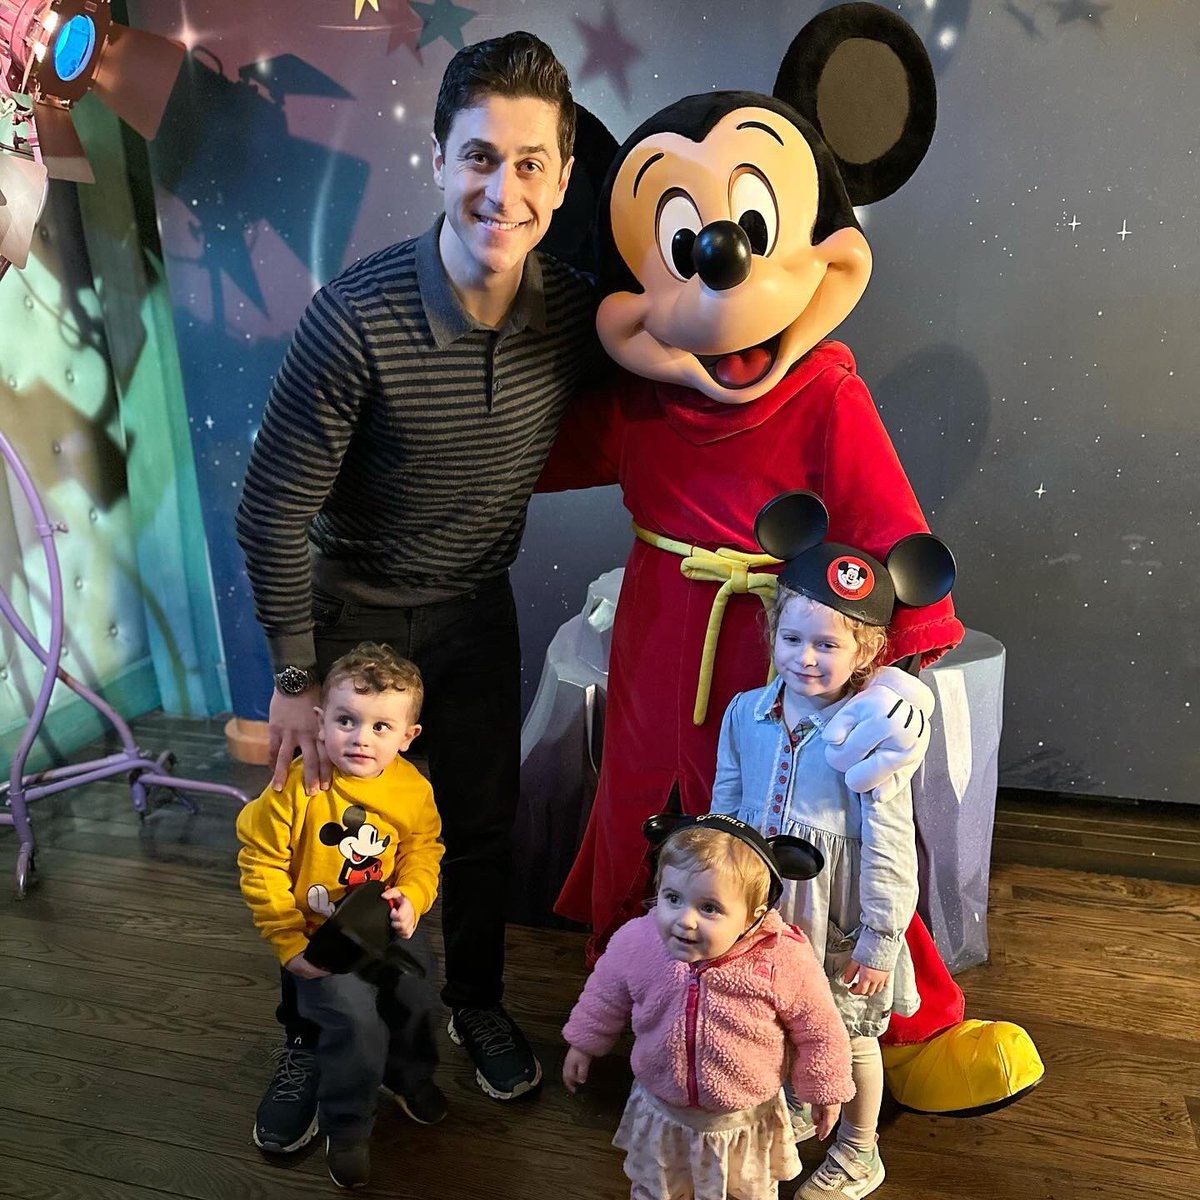 Of course I went to Disneyland to celebrate the Wizards sequel with my fam haha! The rain wasn’t gonna hold us back! #Disney #Disneyland #DadLife #Wizards